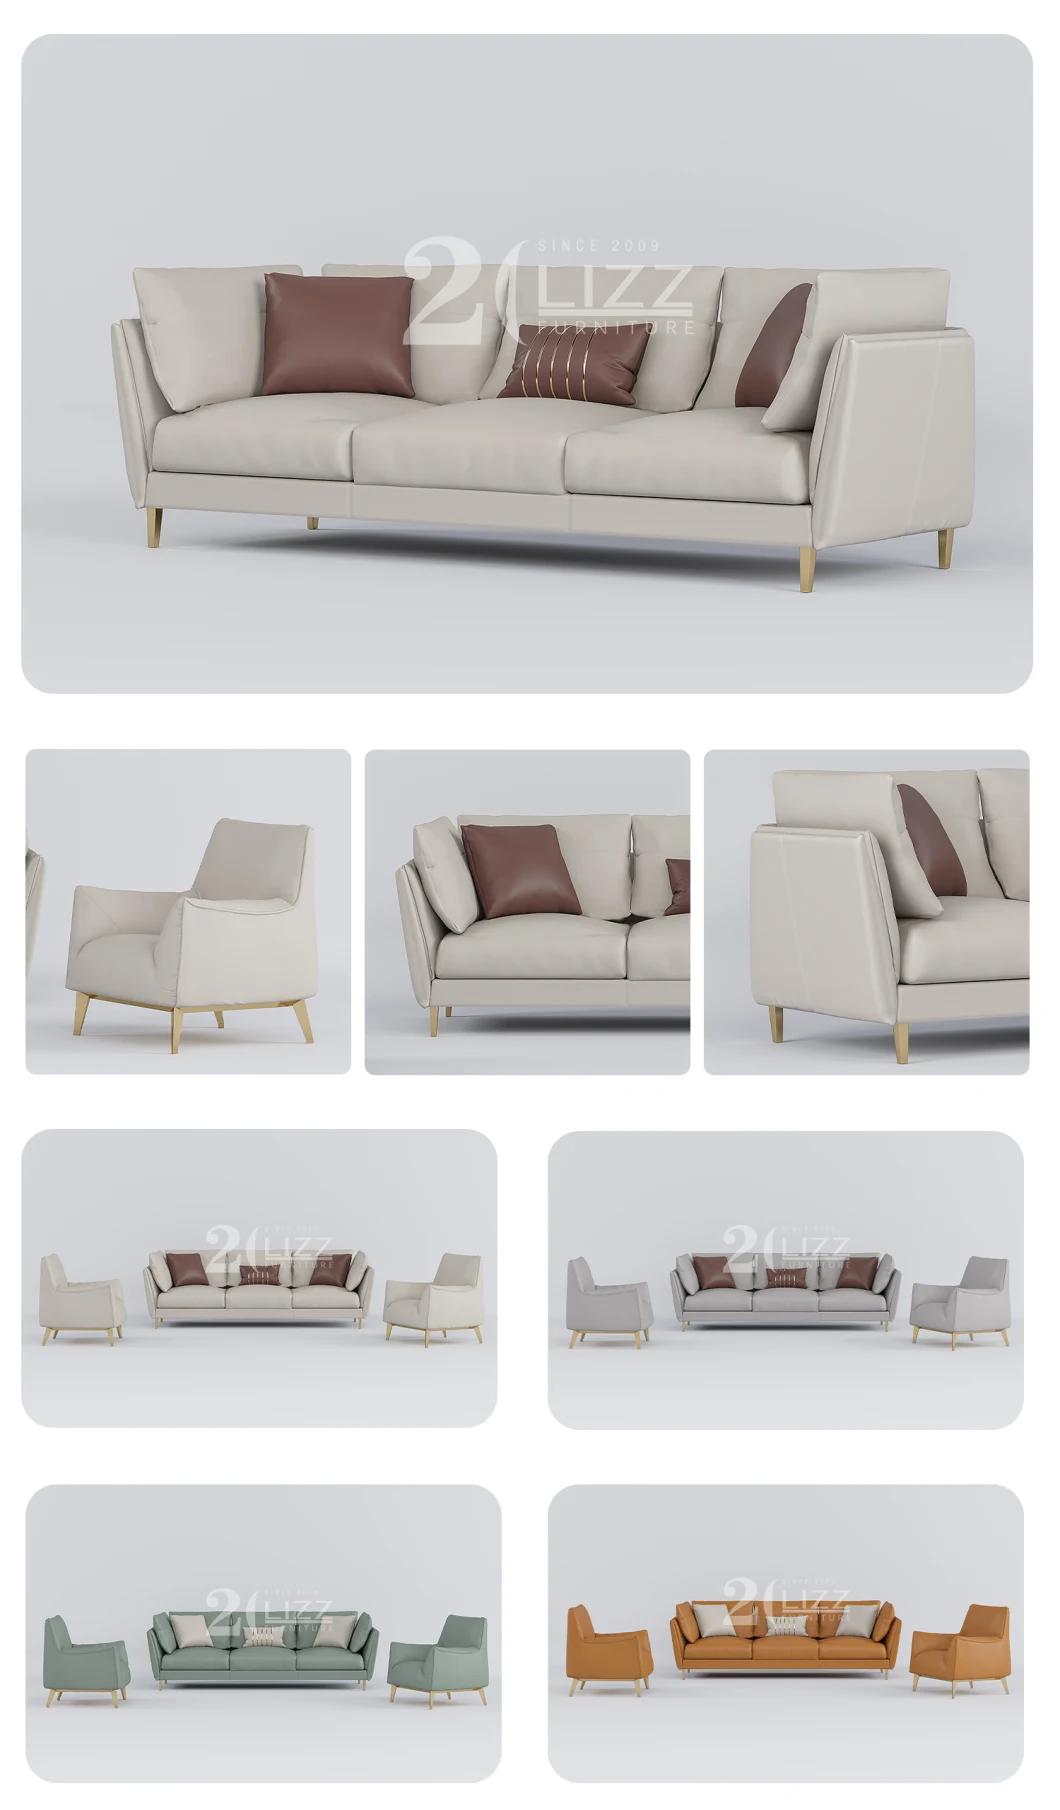 2022 New Design Modern Luxury Italian Geniue Leather Couch Living Room Sofa with Single Sofa